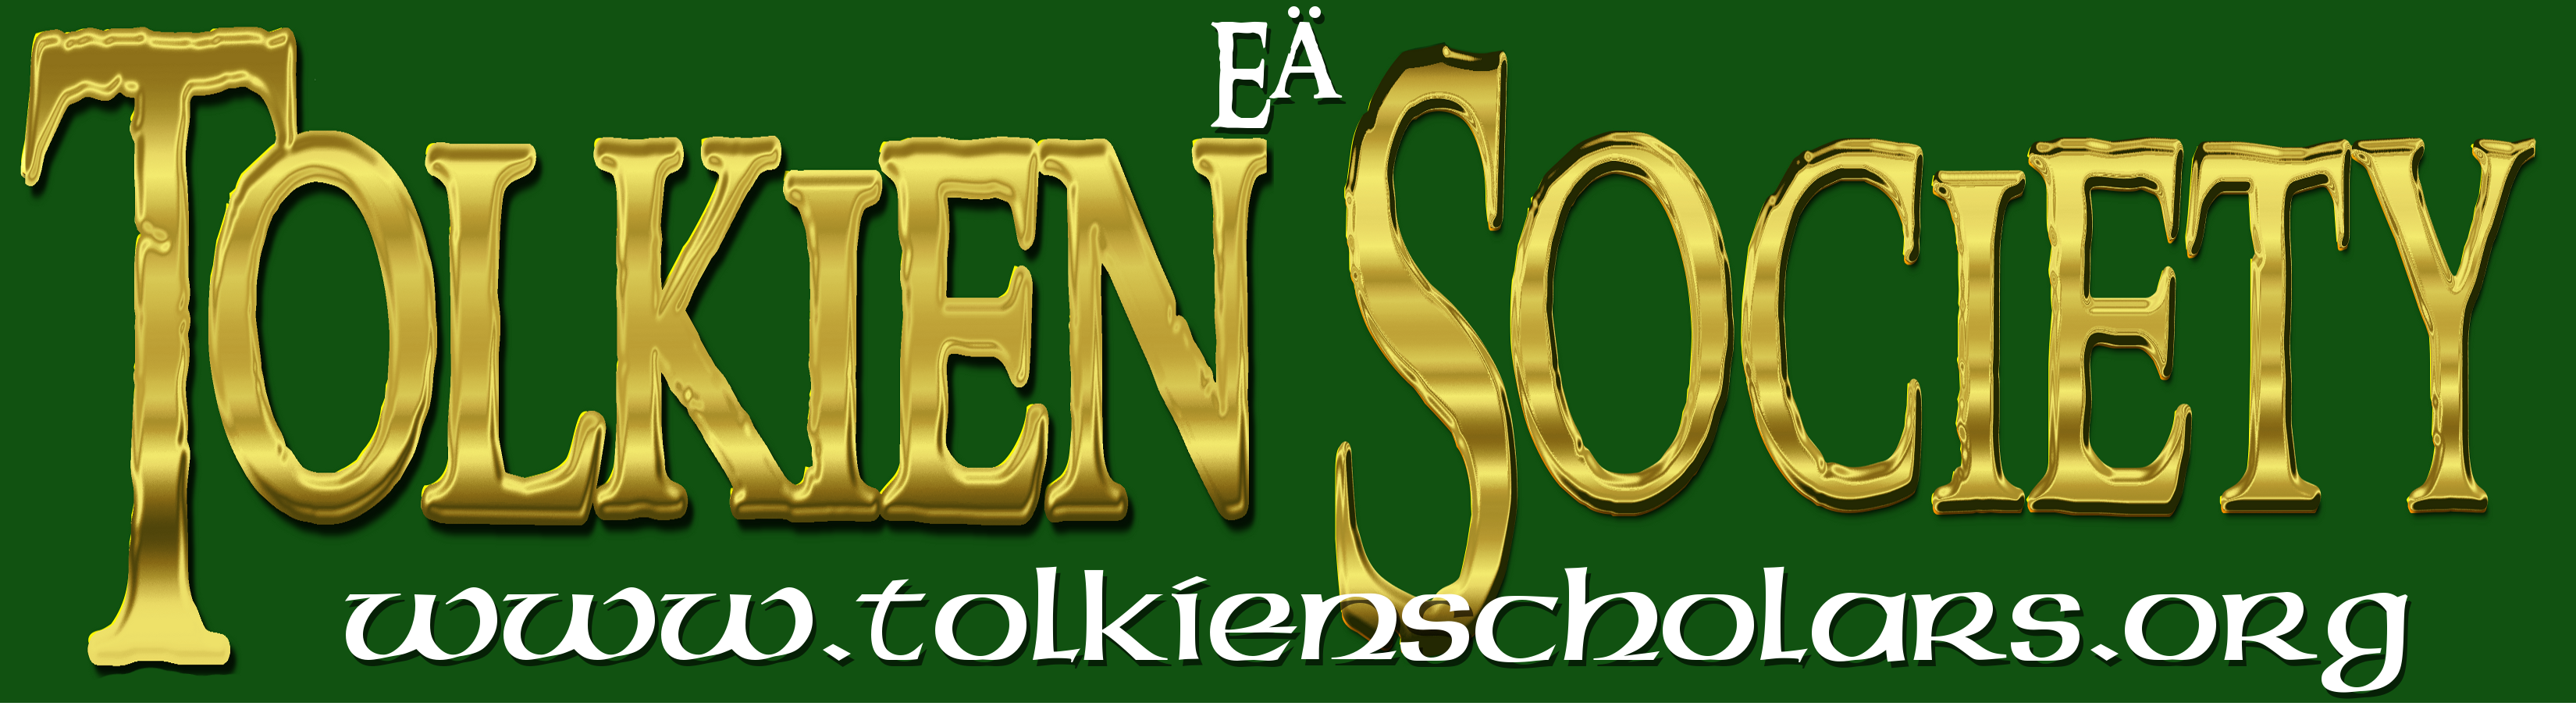 Eä Tolkien Society Meeting Notes for April 17th, 2021